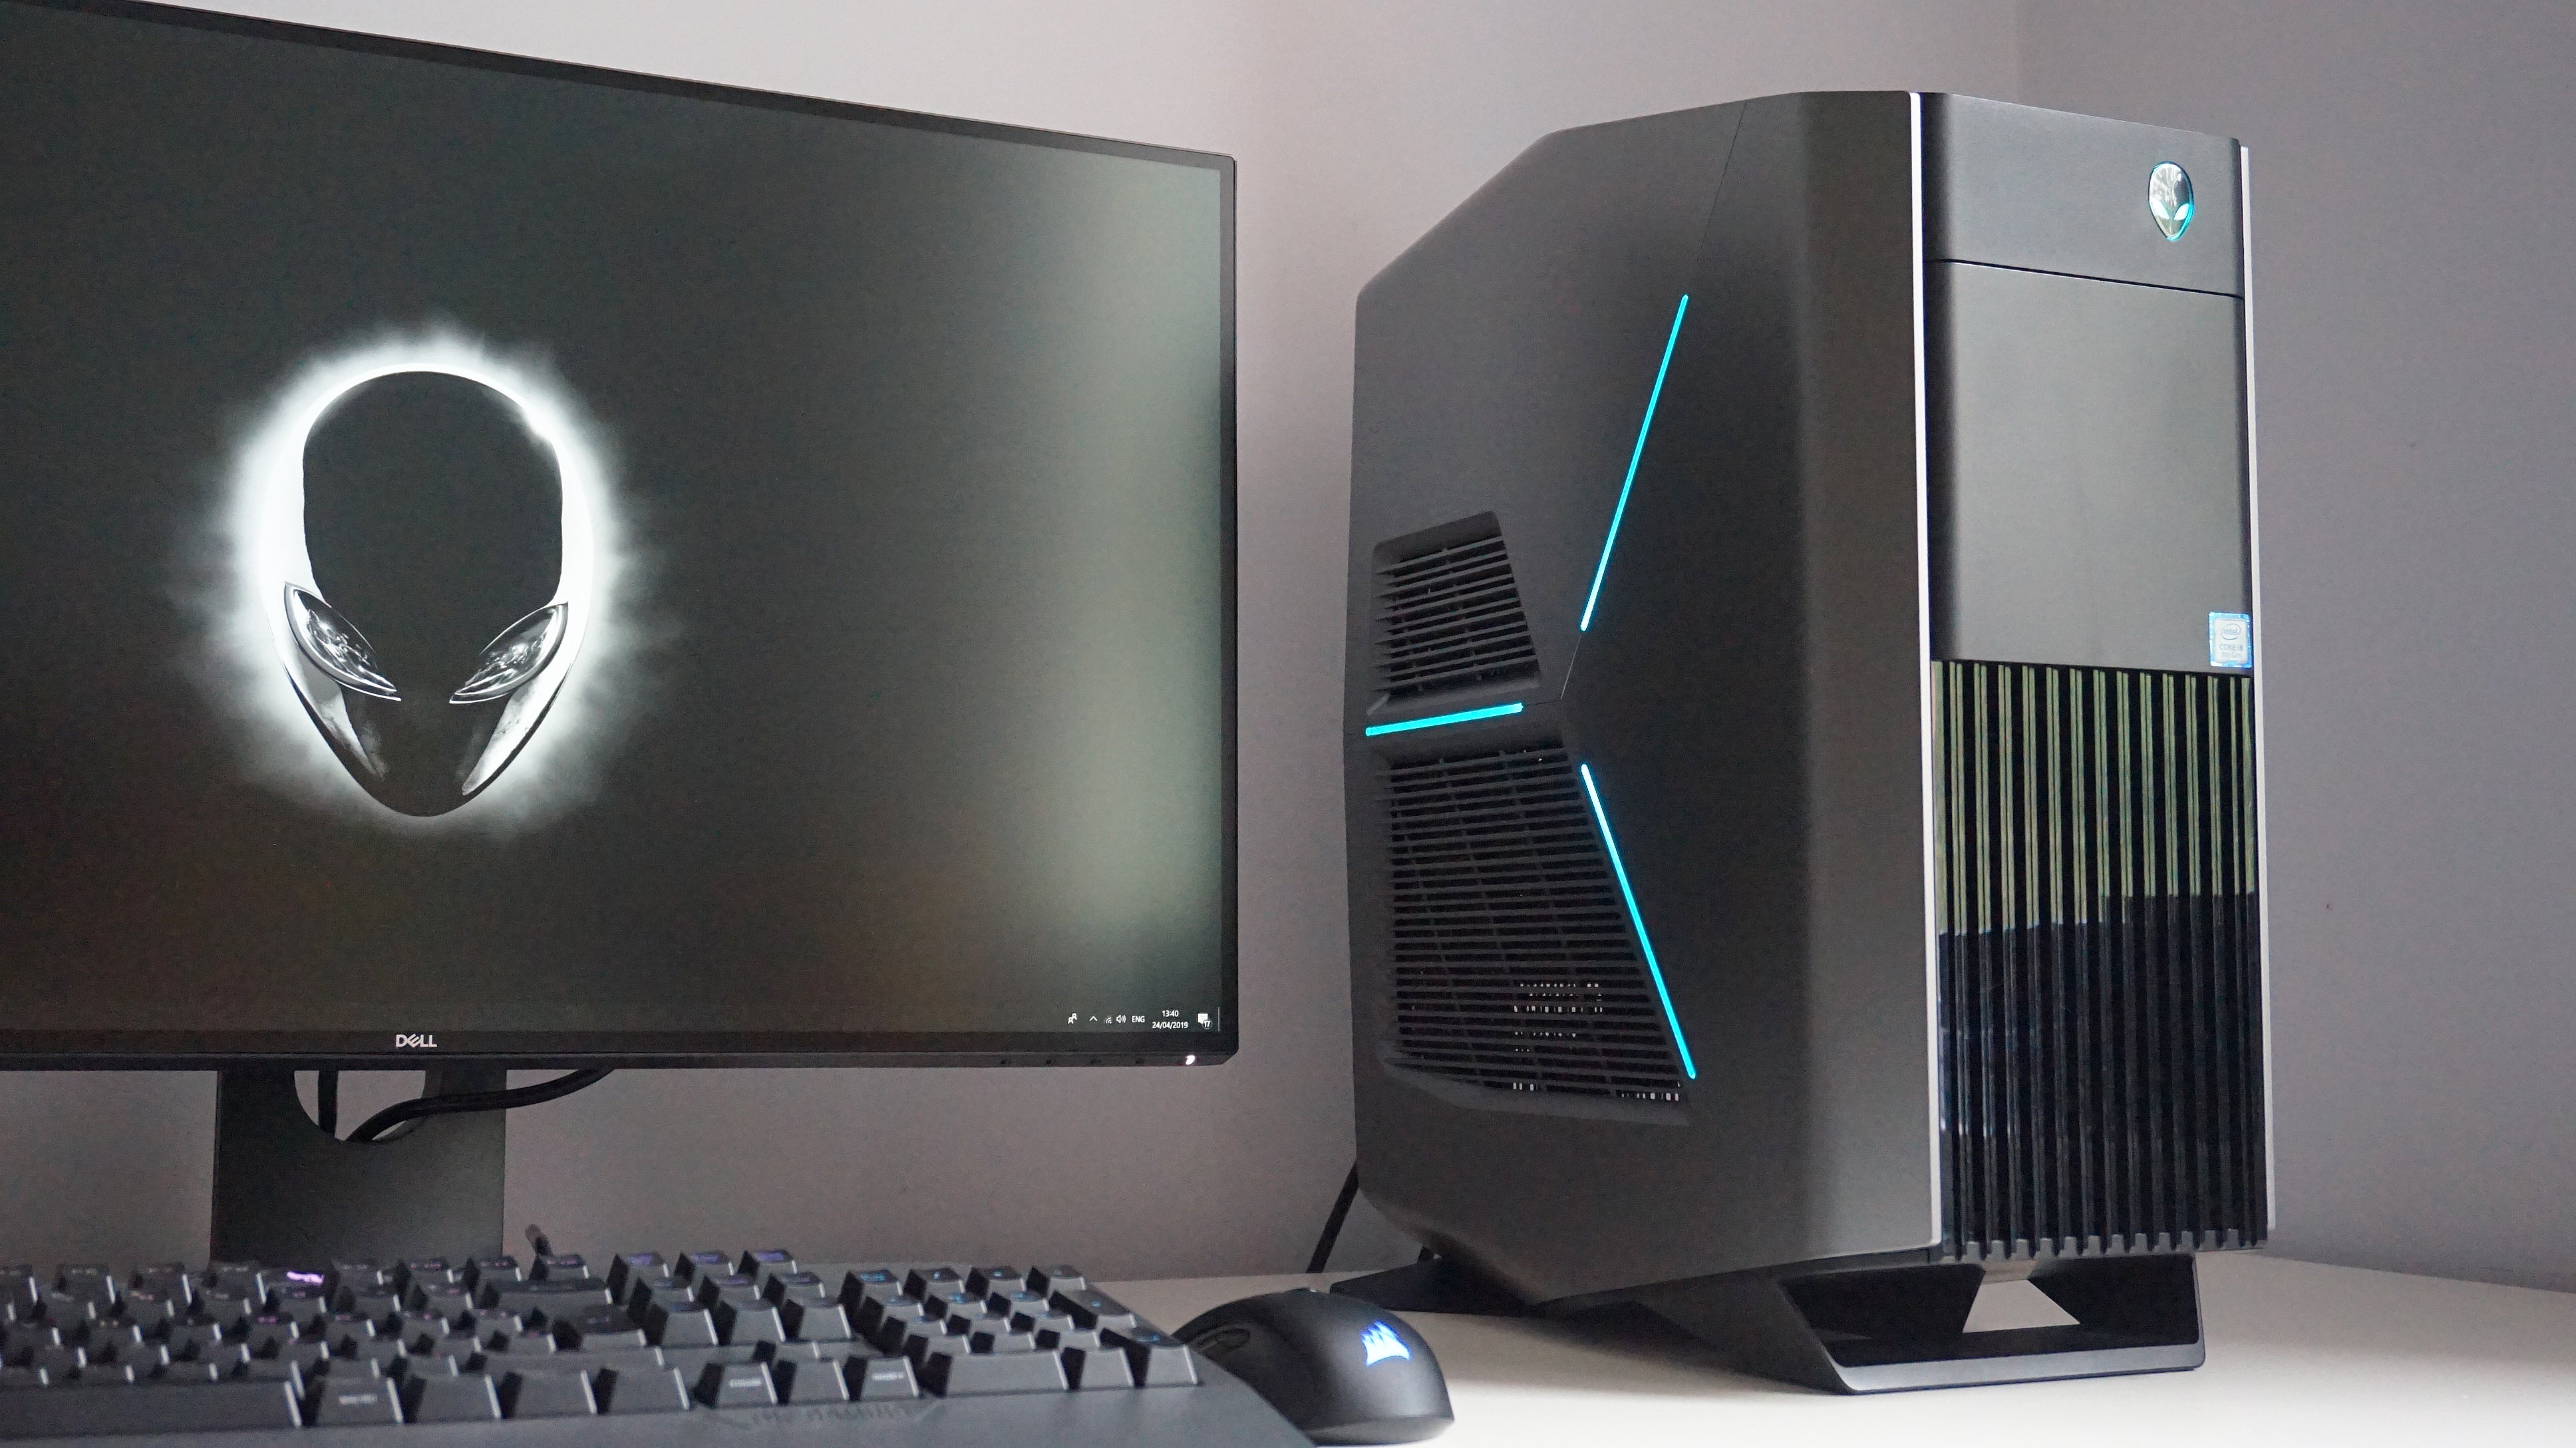 Image for Dell and Alienware BIOS updates break PCs, get recalled